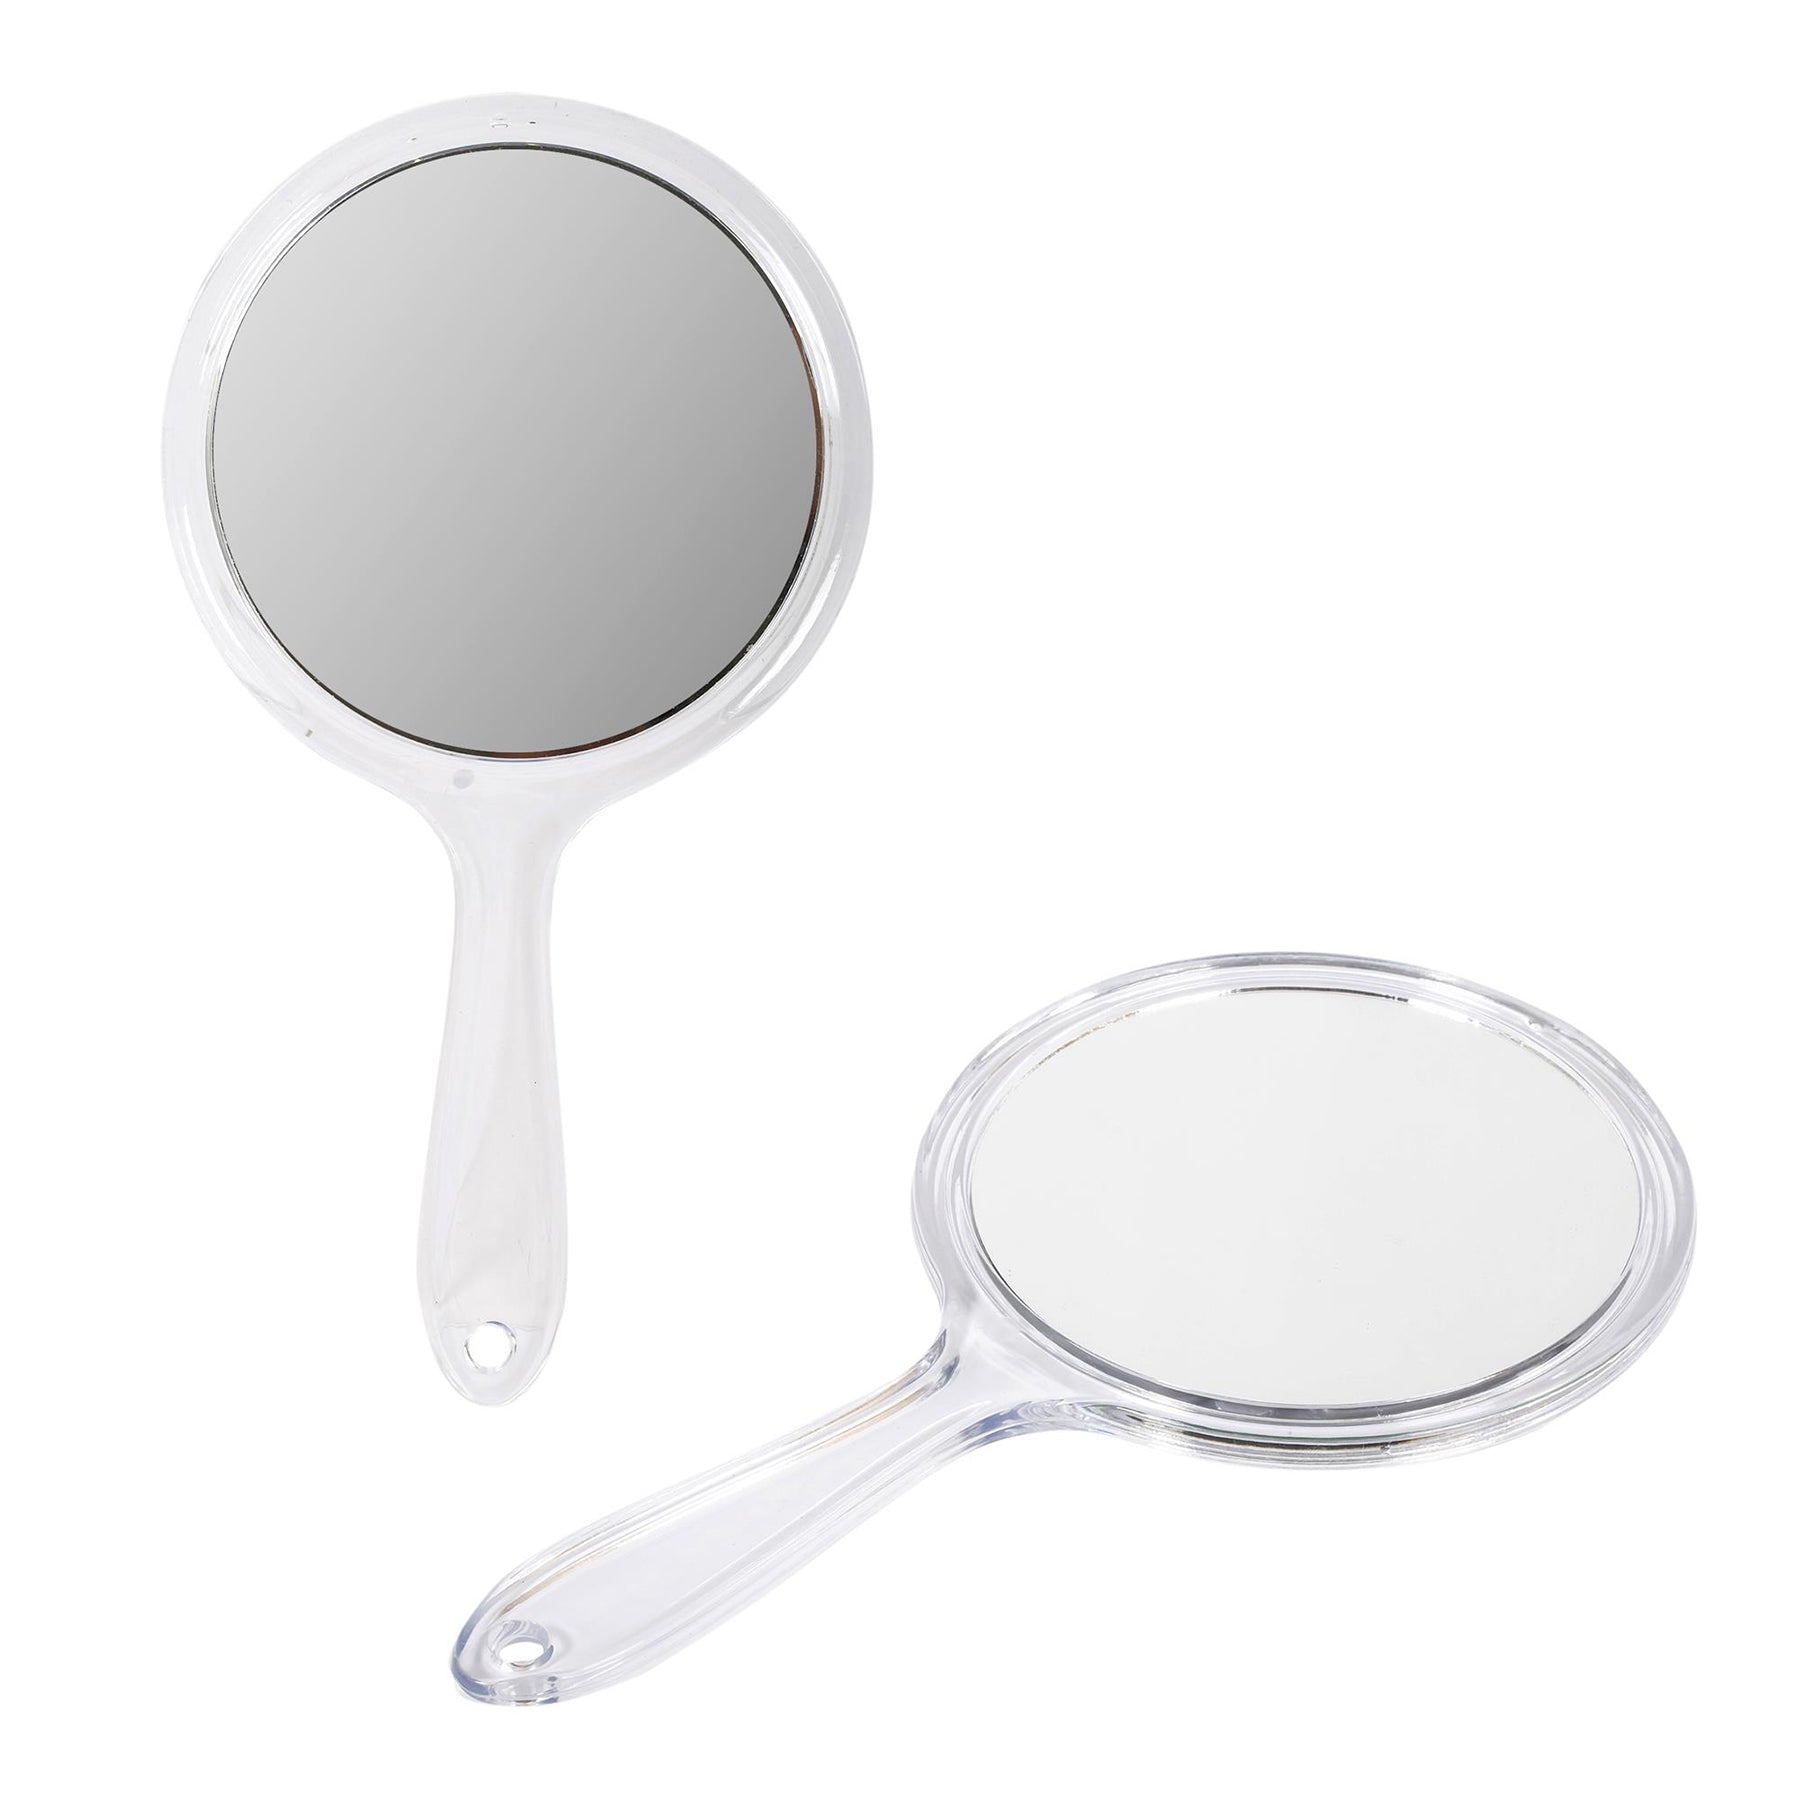 Bodico Hand Mirror Double Sided 1x / 2x Magnification 10.5in